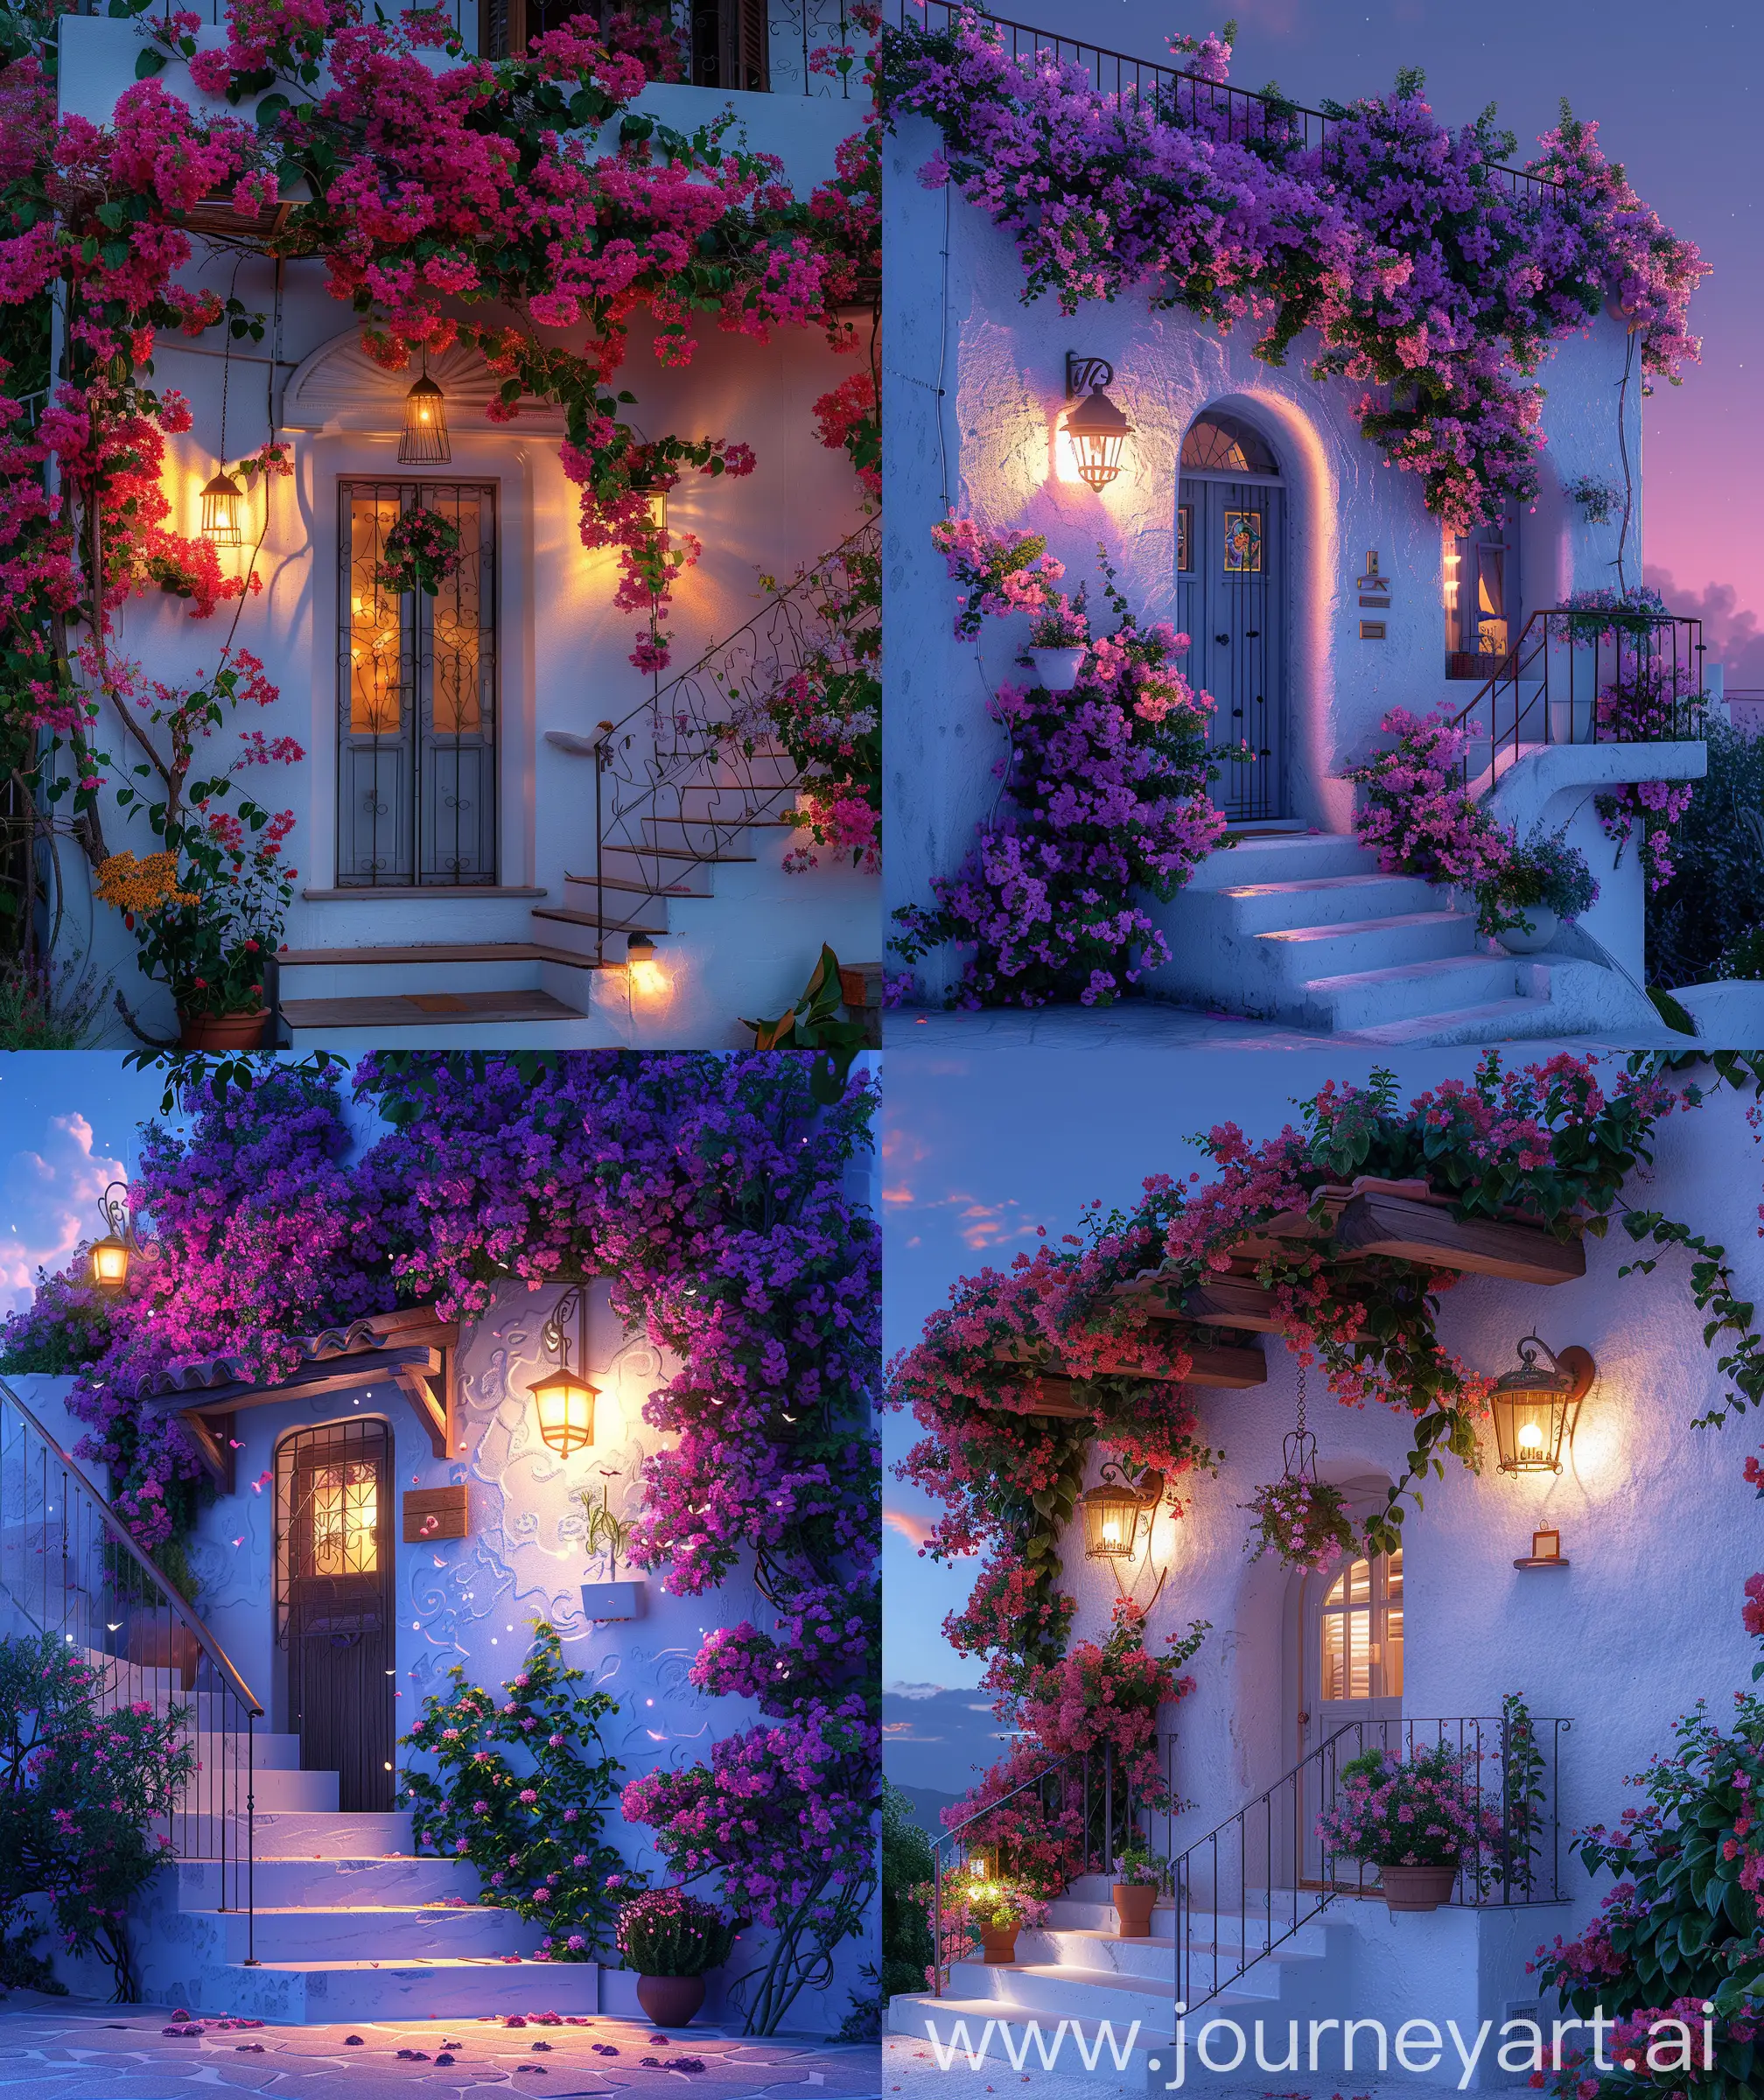 Anime scenary,mokoto shinkai and ghibli scenery mix, direct front fecade view of beautiful white small house, front door decorate with bougainvillea flowers, small stairs hanging wall lamp, evening and night starting, window, ultra HD, high quality, sharp details, illustration, no hyperrealistic --ar 27:32 --s 400